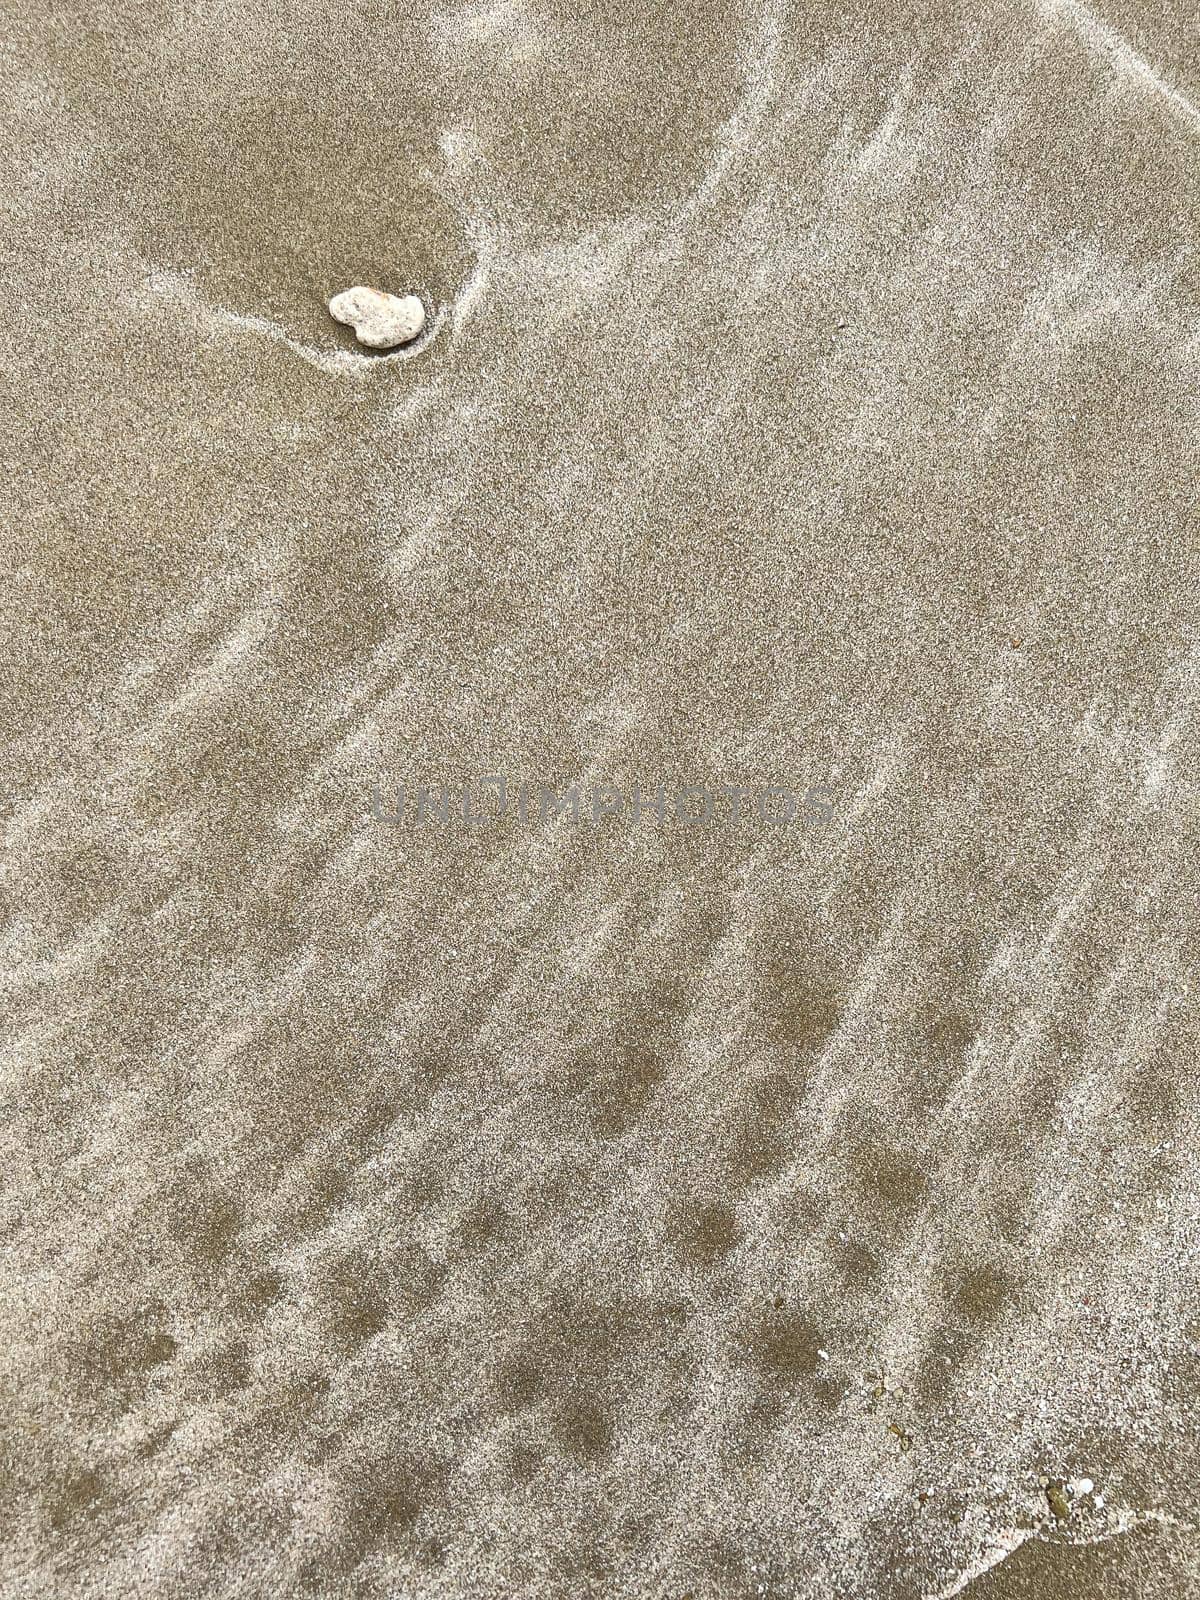 Small wave of water on clear sandy beach